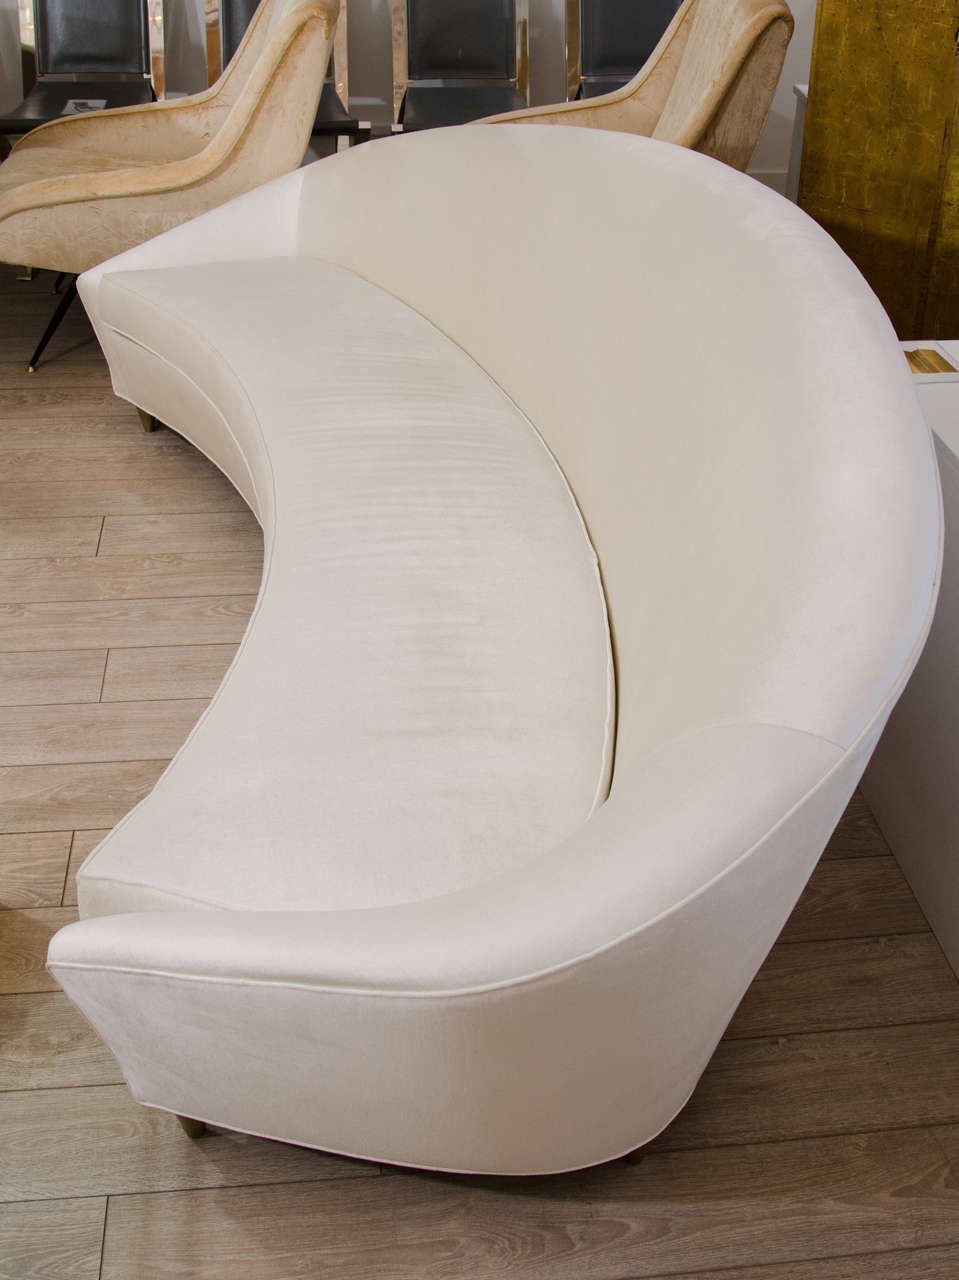 Upholstered curved sofa with brass feet amd tight back attributed to Ico Parisi.